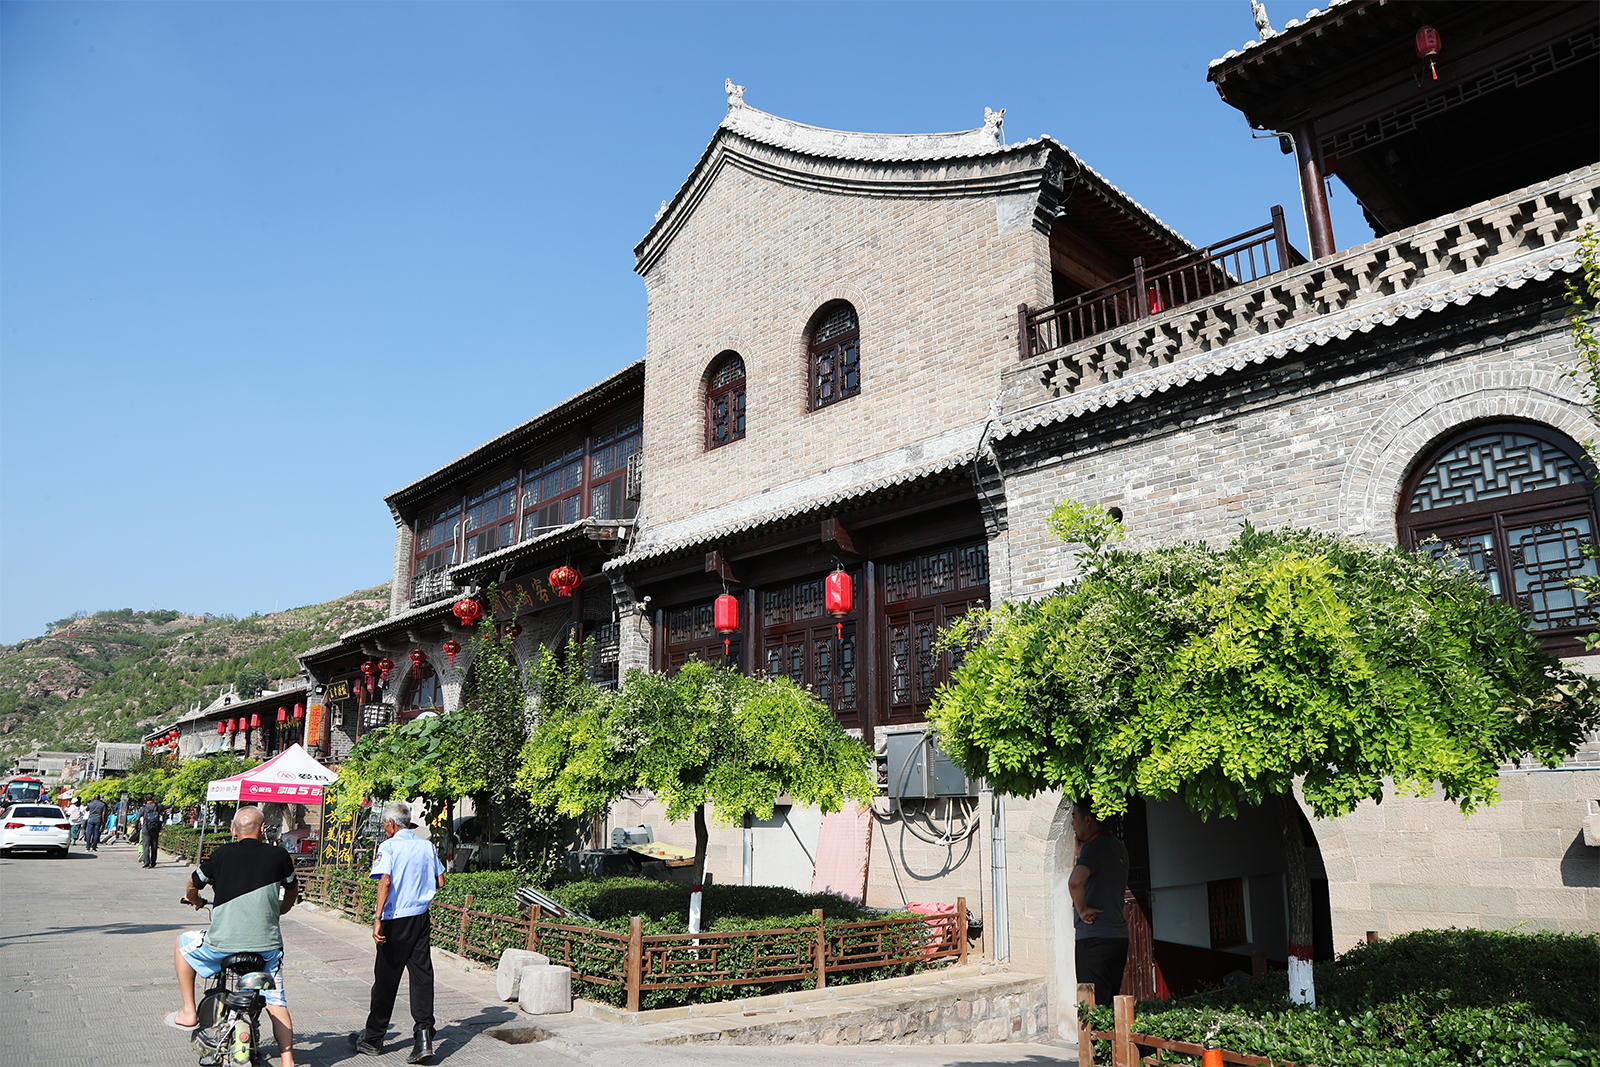 A view of Qikou Ancient Town in Lvliang, Shanxi Province. /CGTN